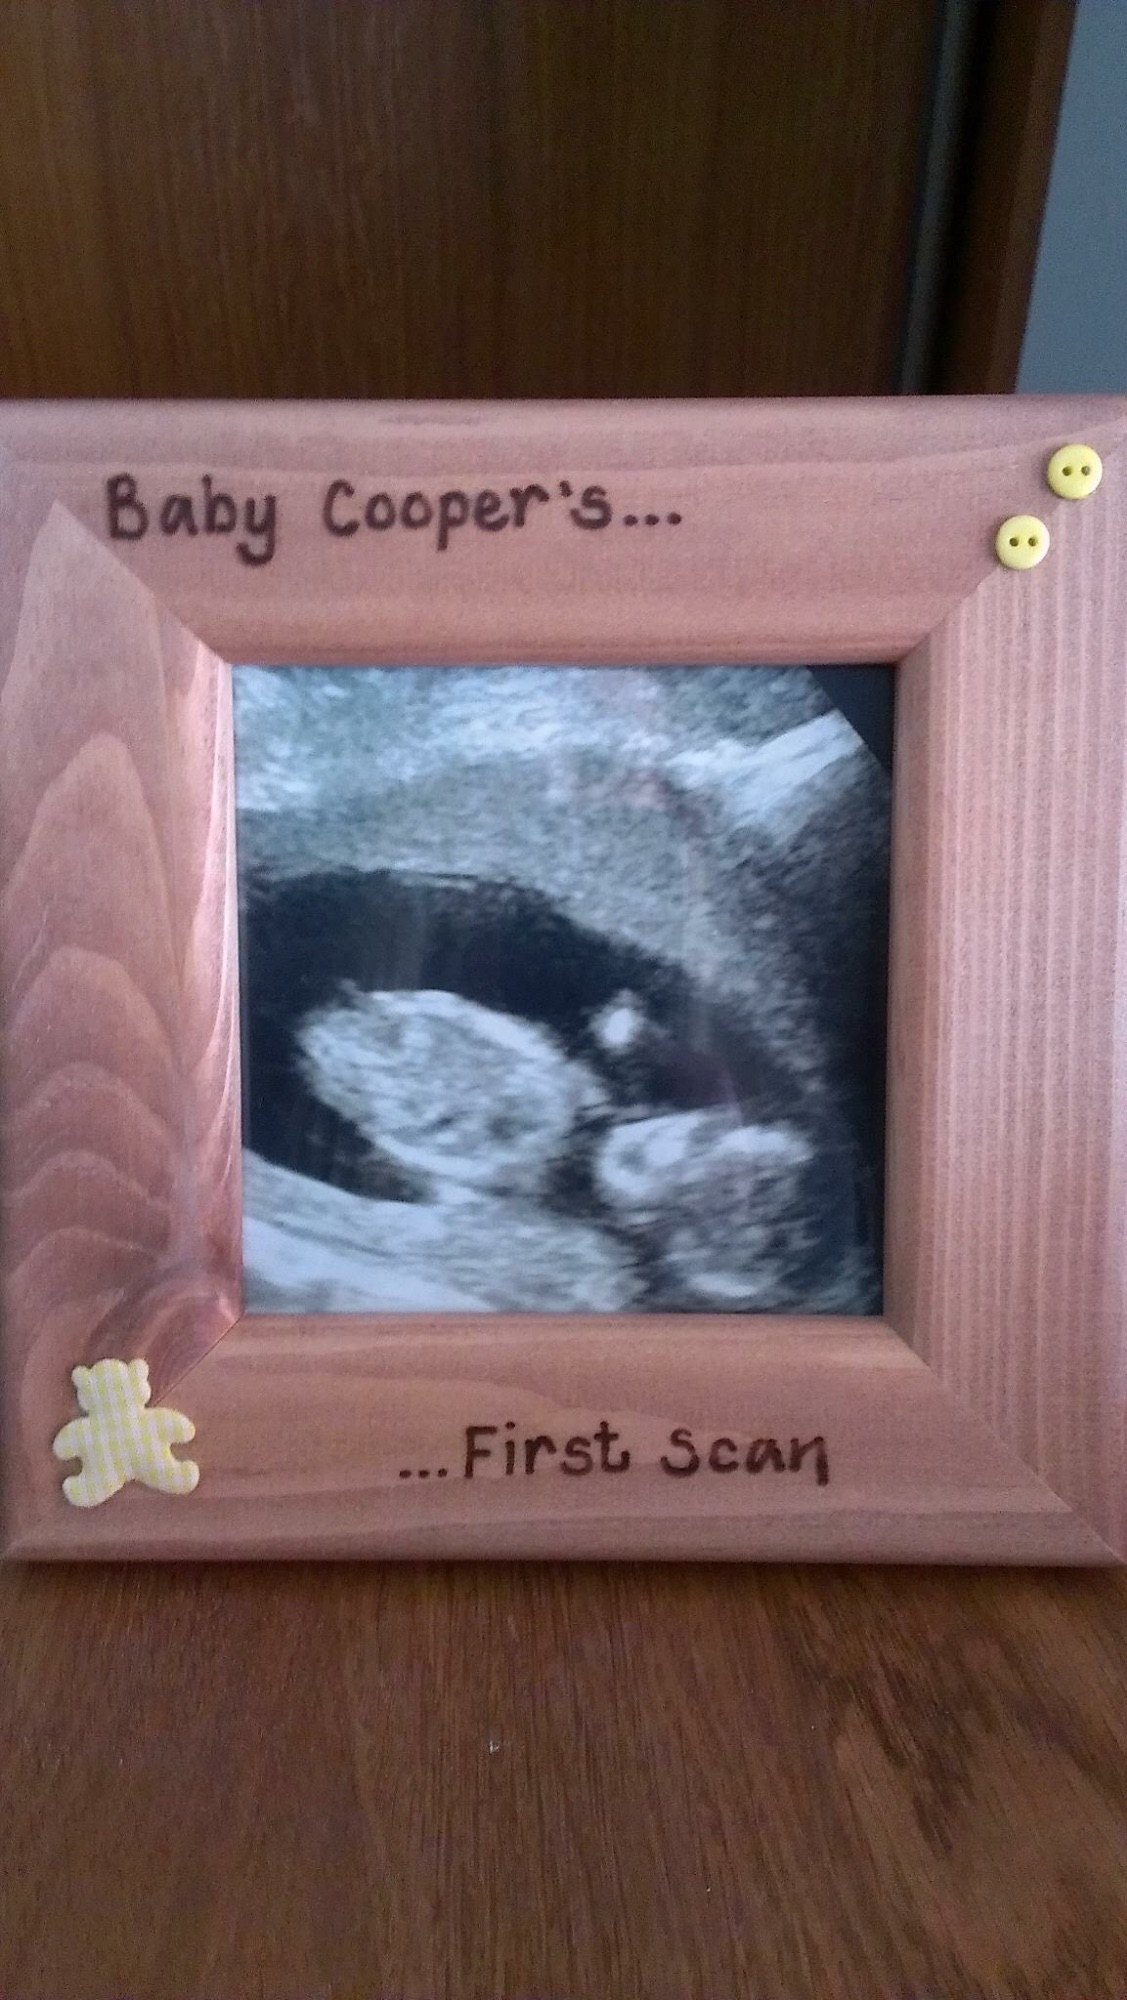 baby scan photo frame